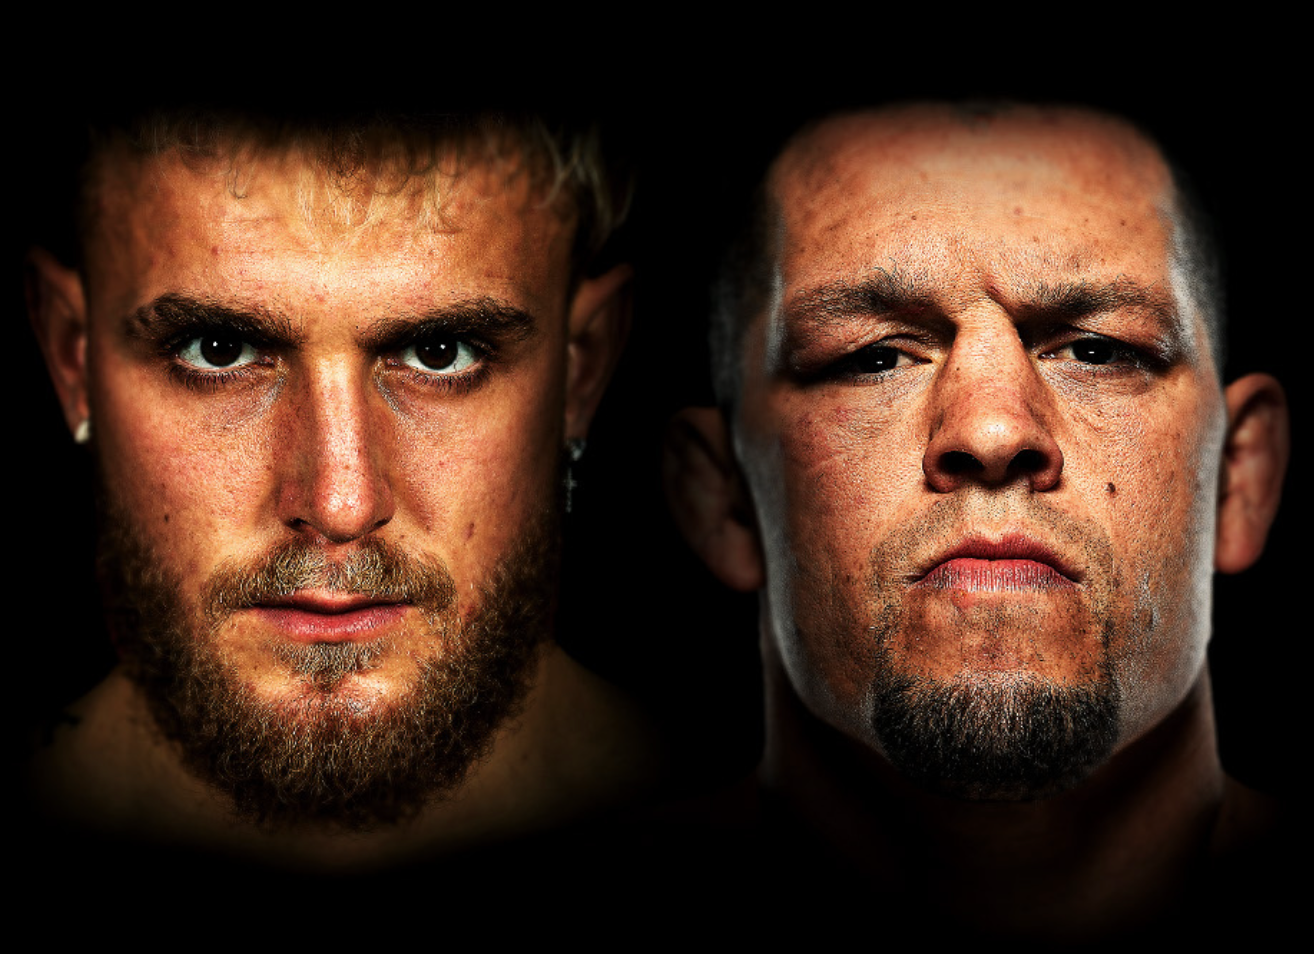 Jake Paul vs Nate Diaz live stream, actual fight time, card, PPV price, boxing odds; cheaper to watch on ESPN+ or DAZN?